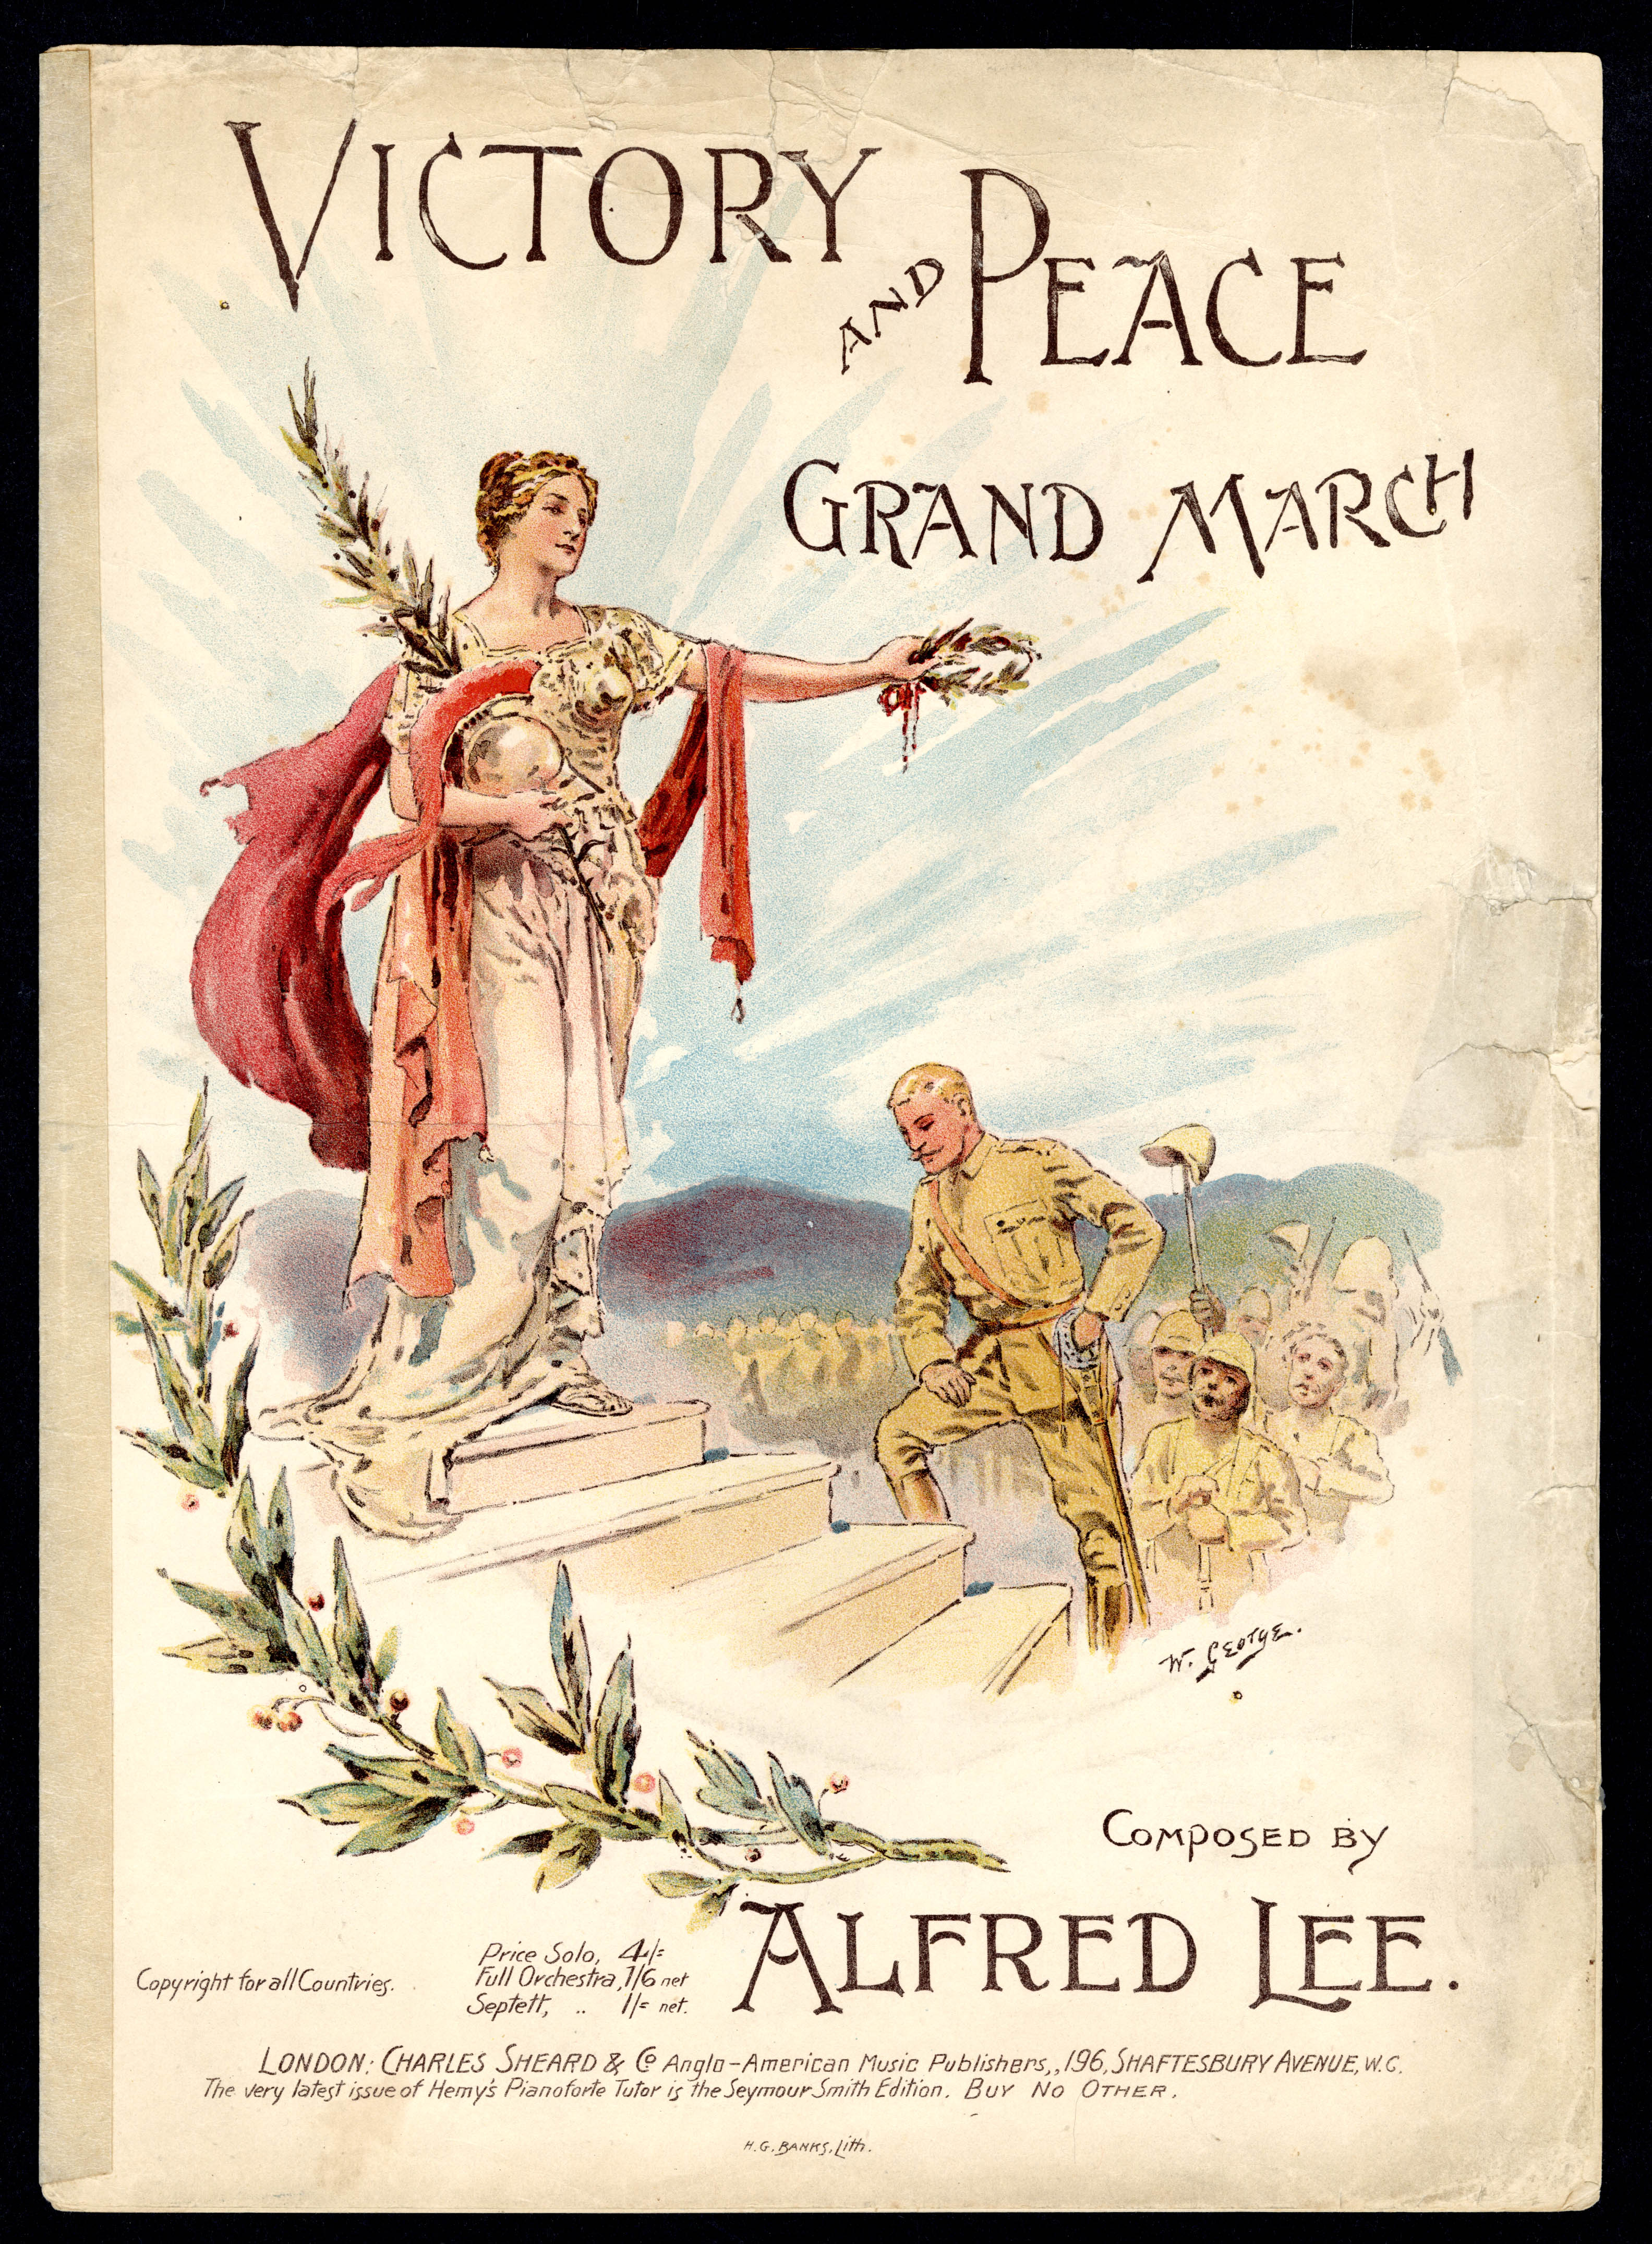 Colour illustrated cover of a music sheet from the Max Tyler Music Hall Collection entitled Victory and Peace Grand March